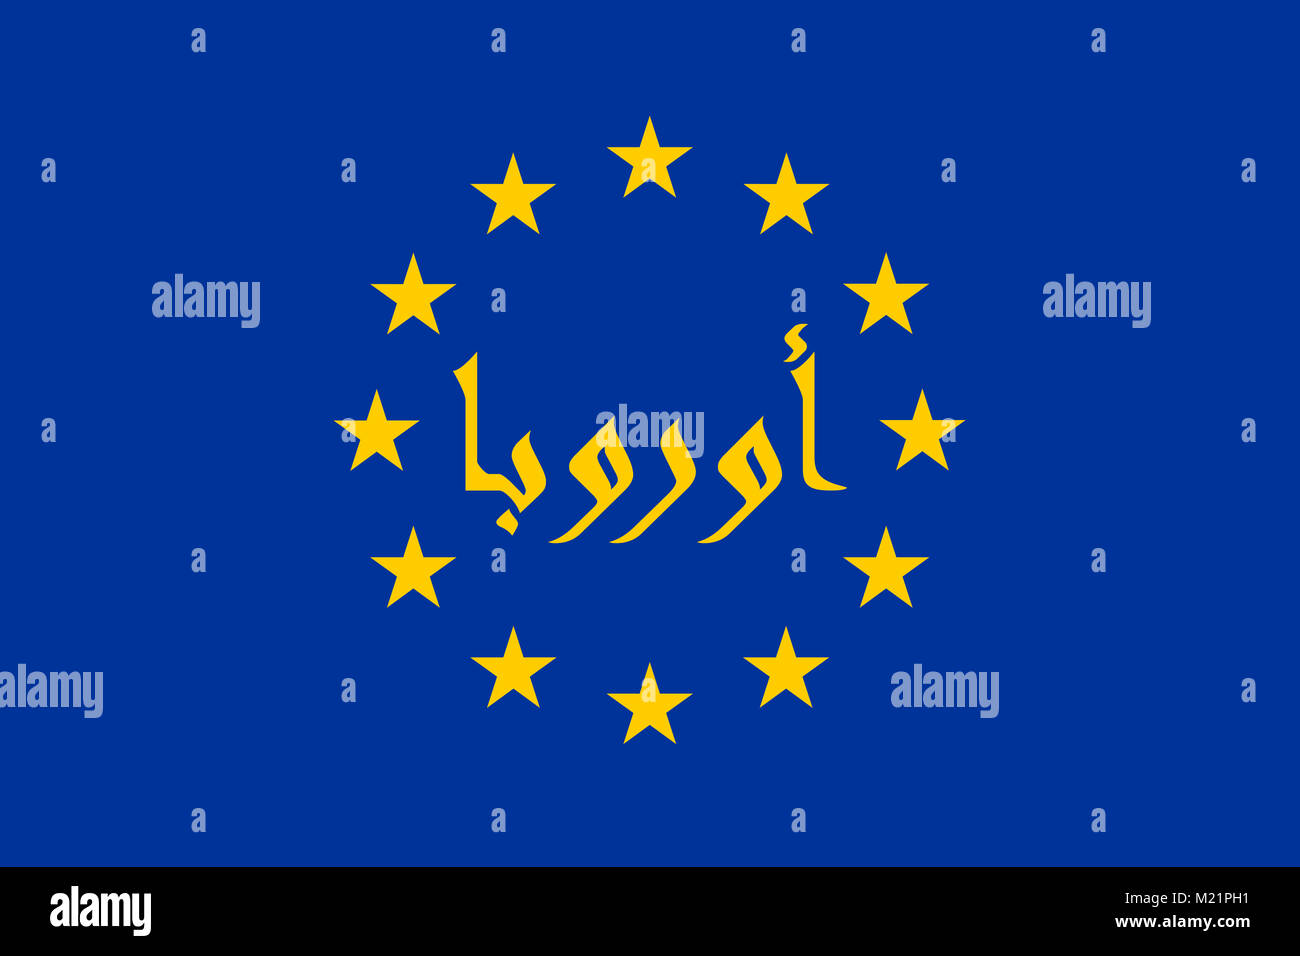 Flag of EU with Arabic ligature inscription, which means: 'Europe'. Illustration of Eurabia and Eurafrica political neologisms. Stock Photo